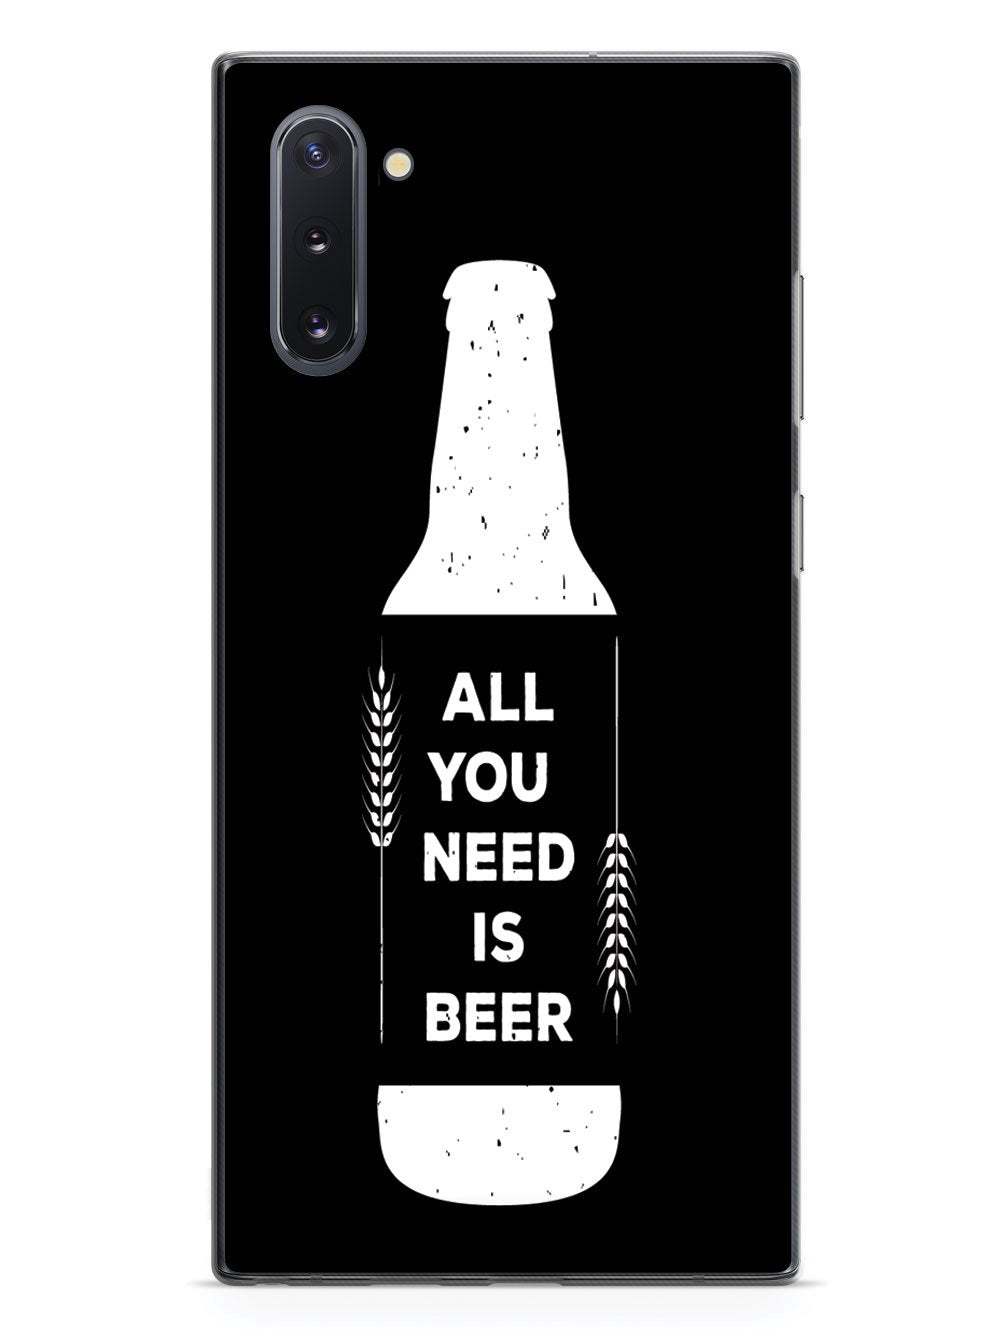 All You Need is Beer - Black Case